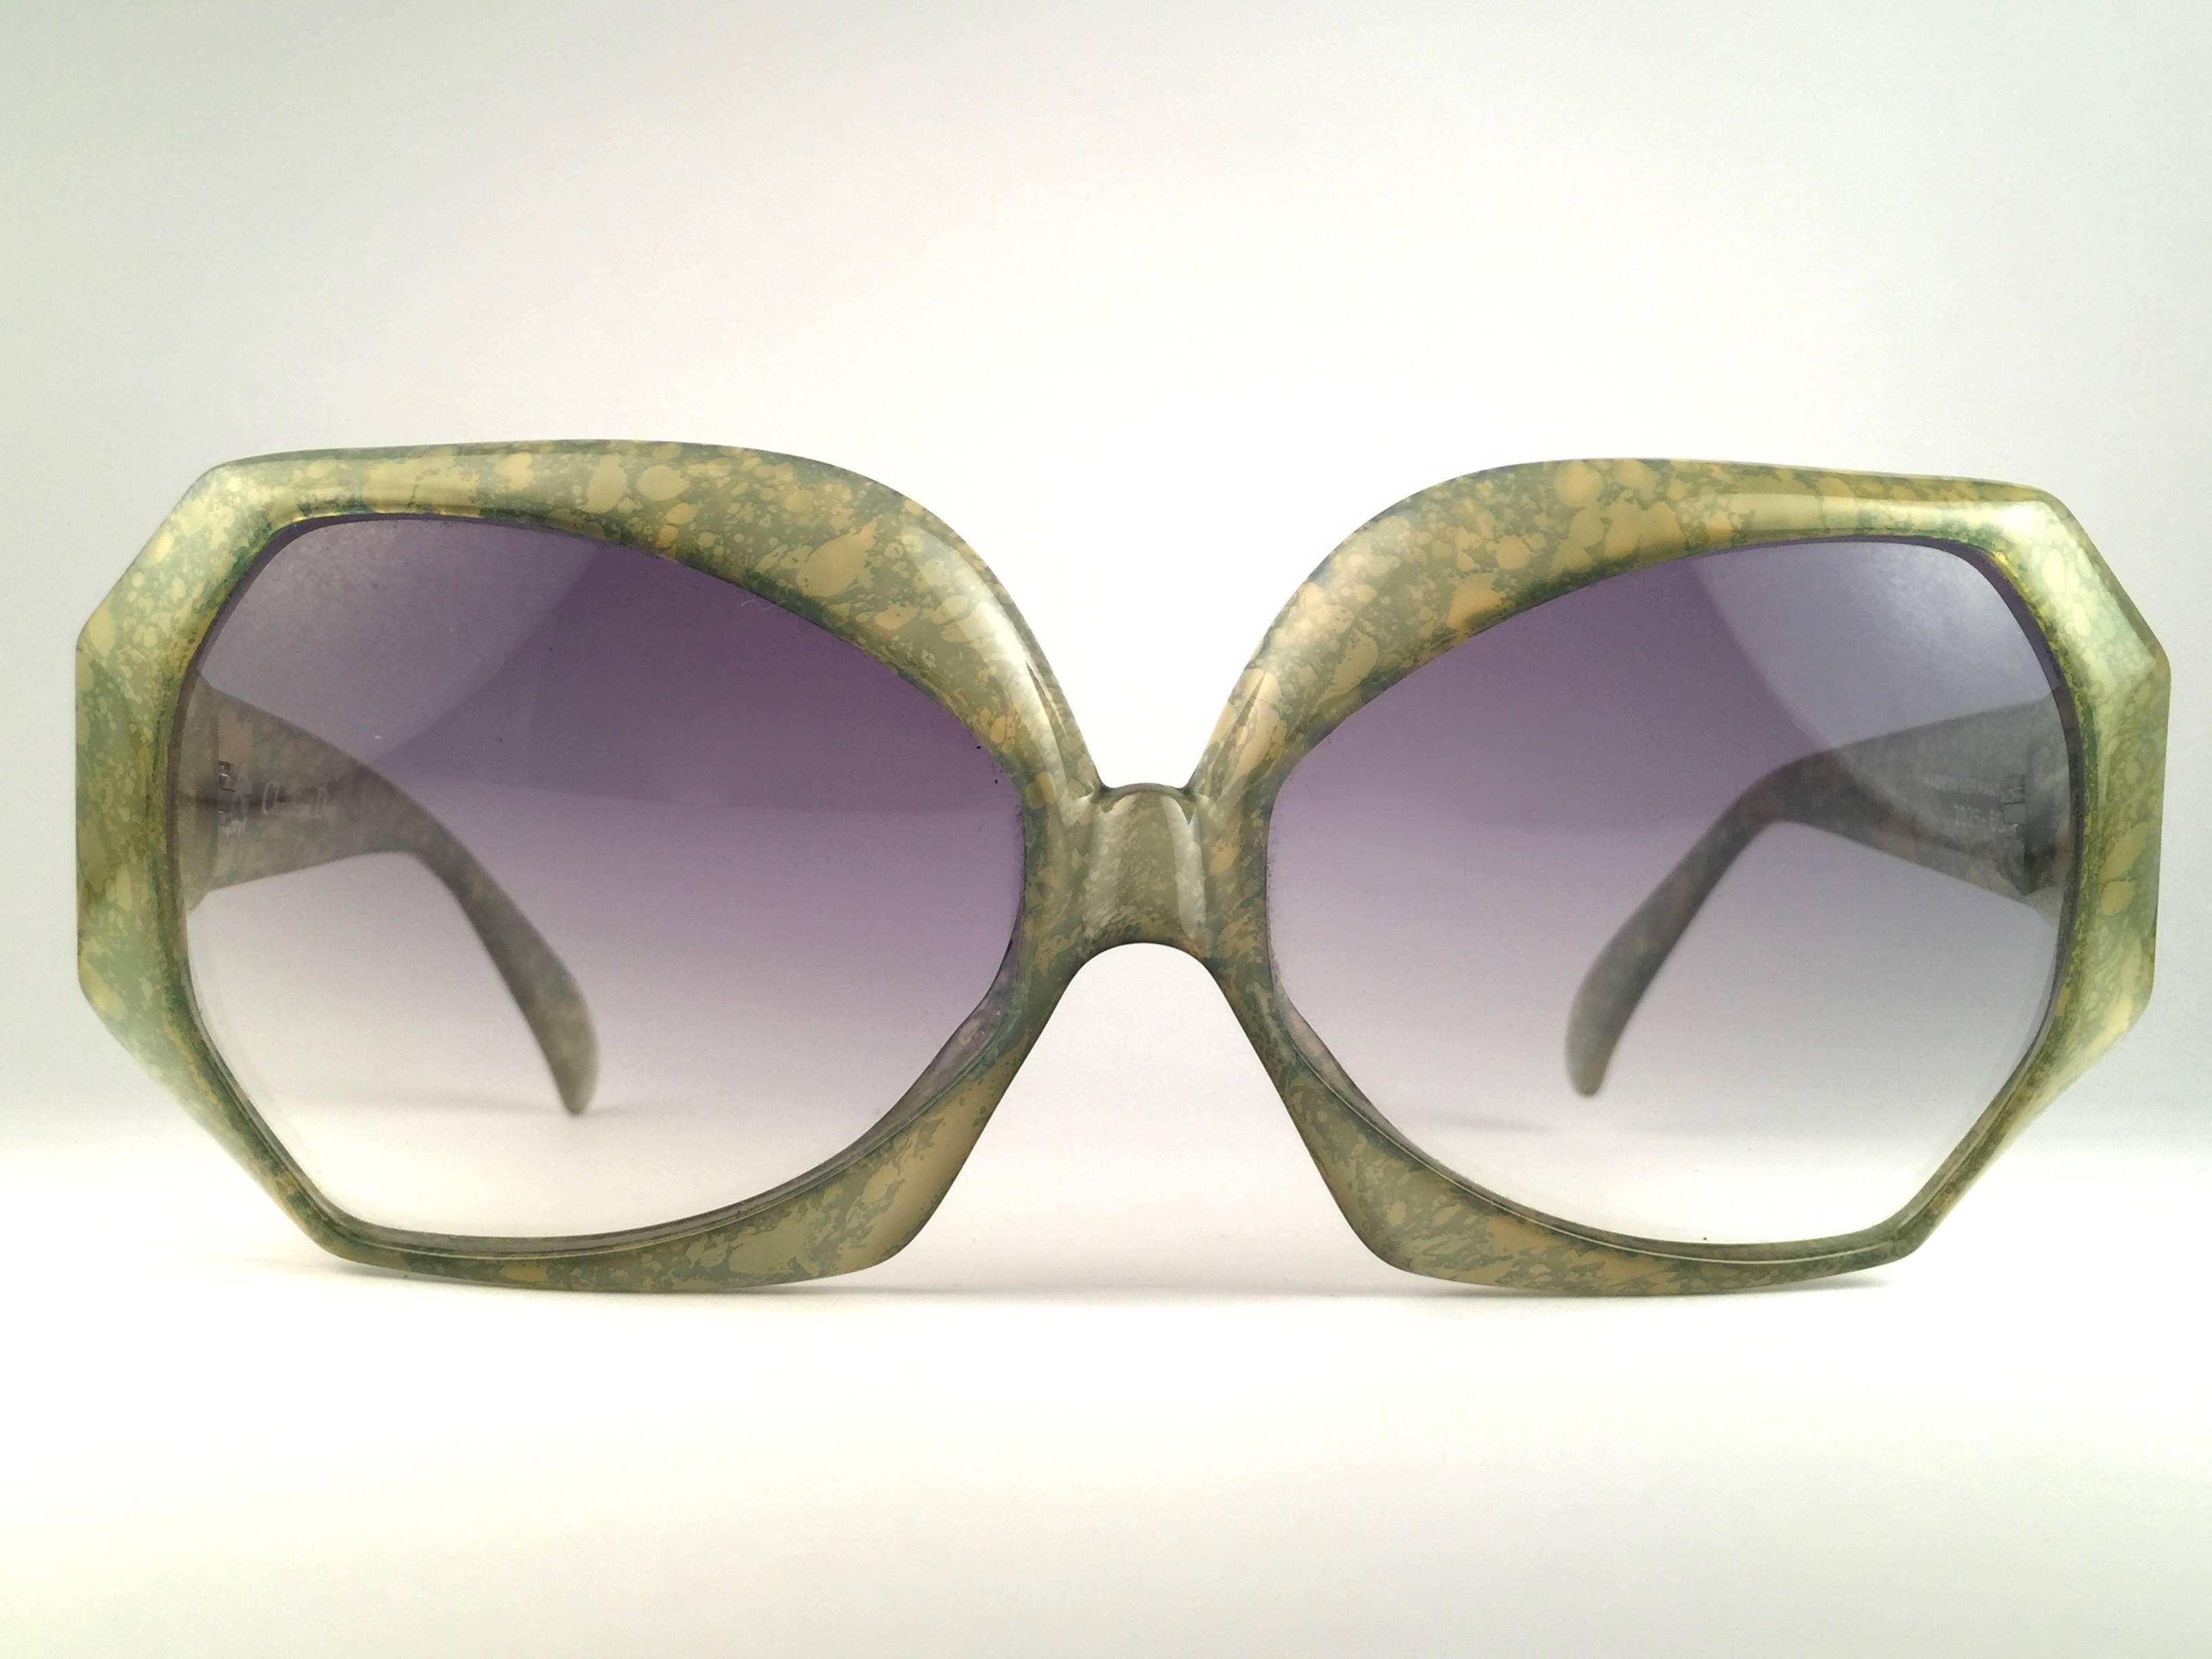 New Vintage Christian Dior 2025 60 Jasped Green frame sporting light green gradient lenses. 

Made in Germany.
 
Produced and design in 1970's.

A collector’s piece!

New, never worn or displayed. Comes with its original silver Christian Dior